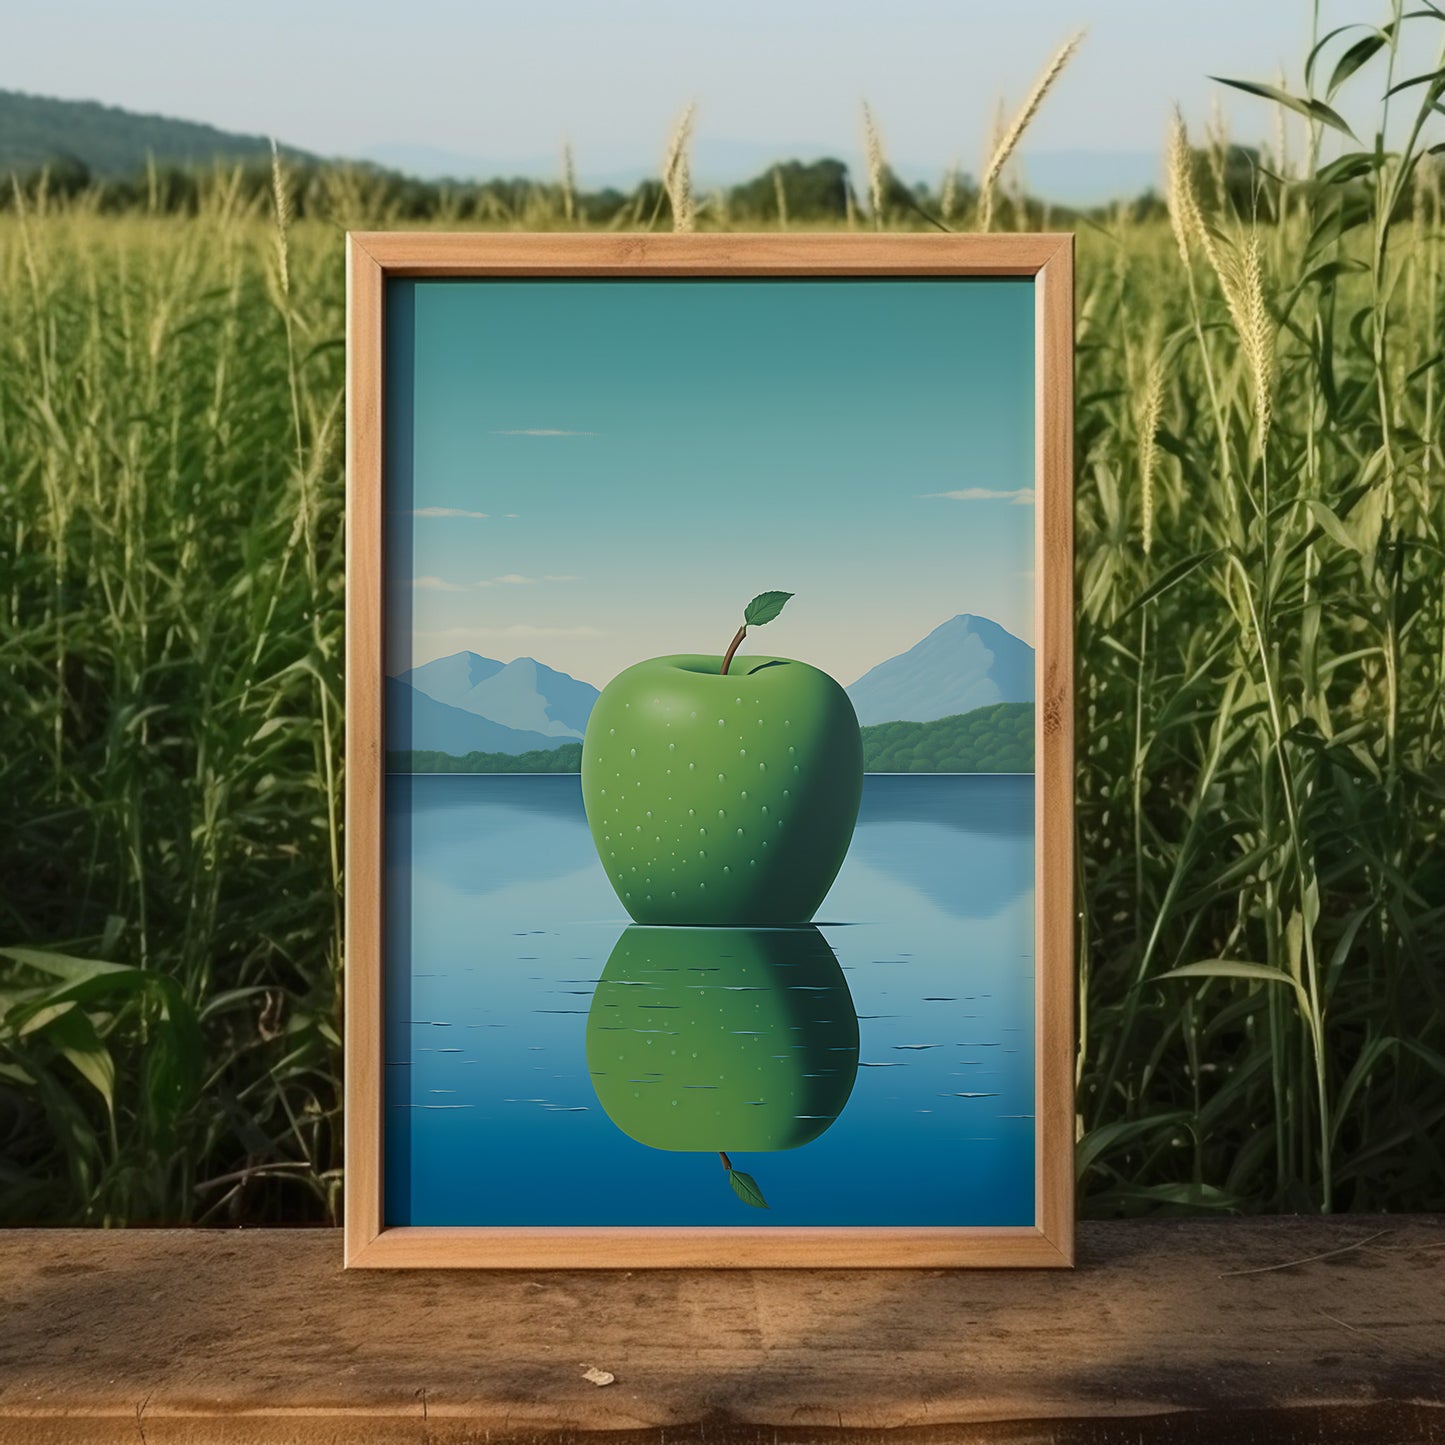 A framed image of a green apple with its reflection, set against a scenic lake and mountain backdrop.